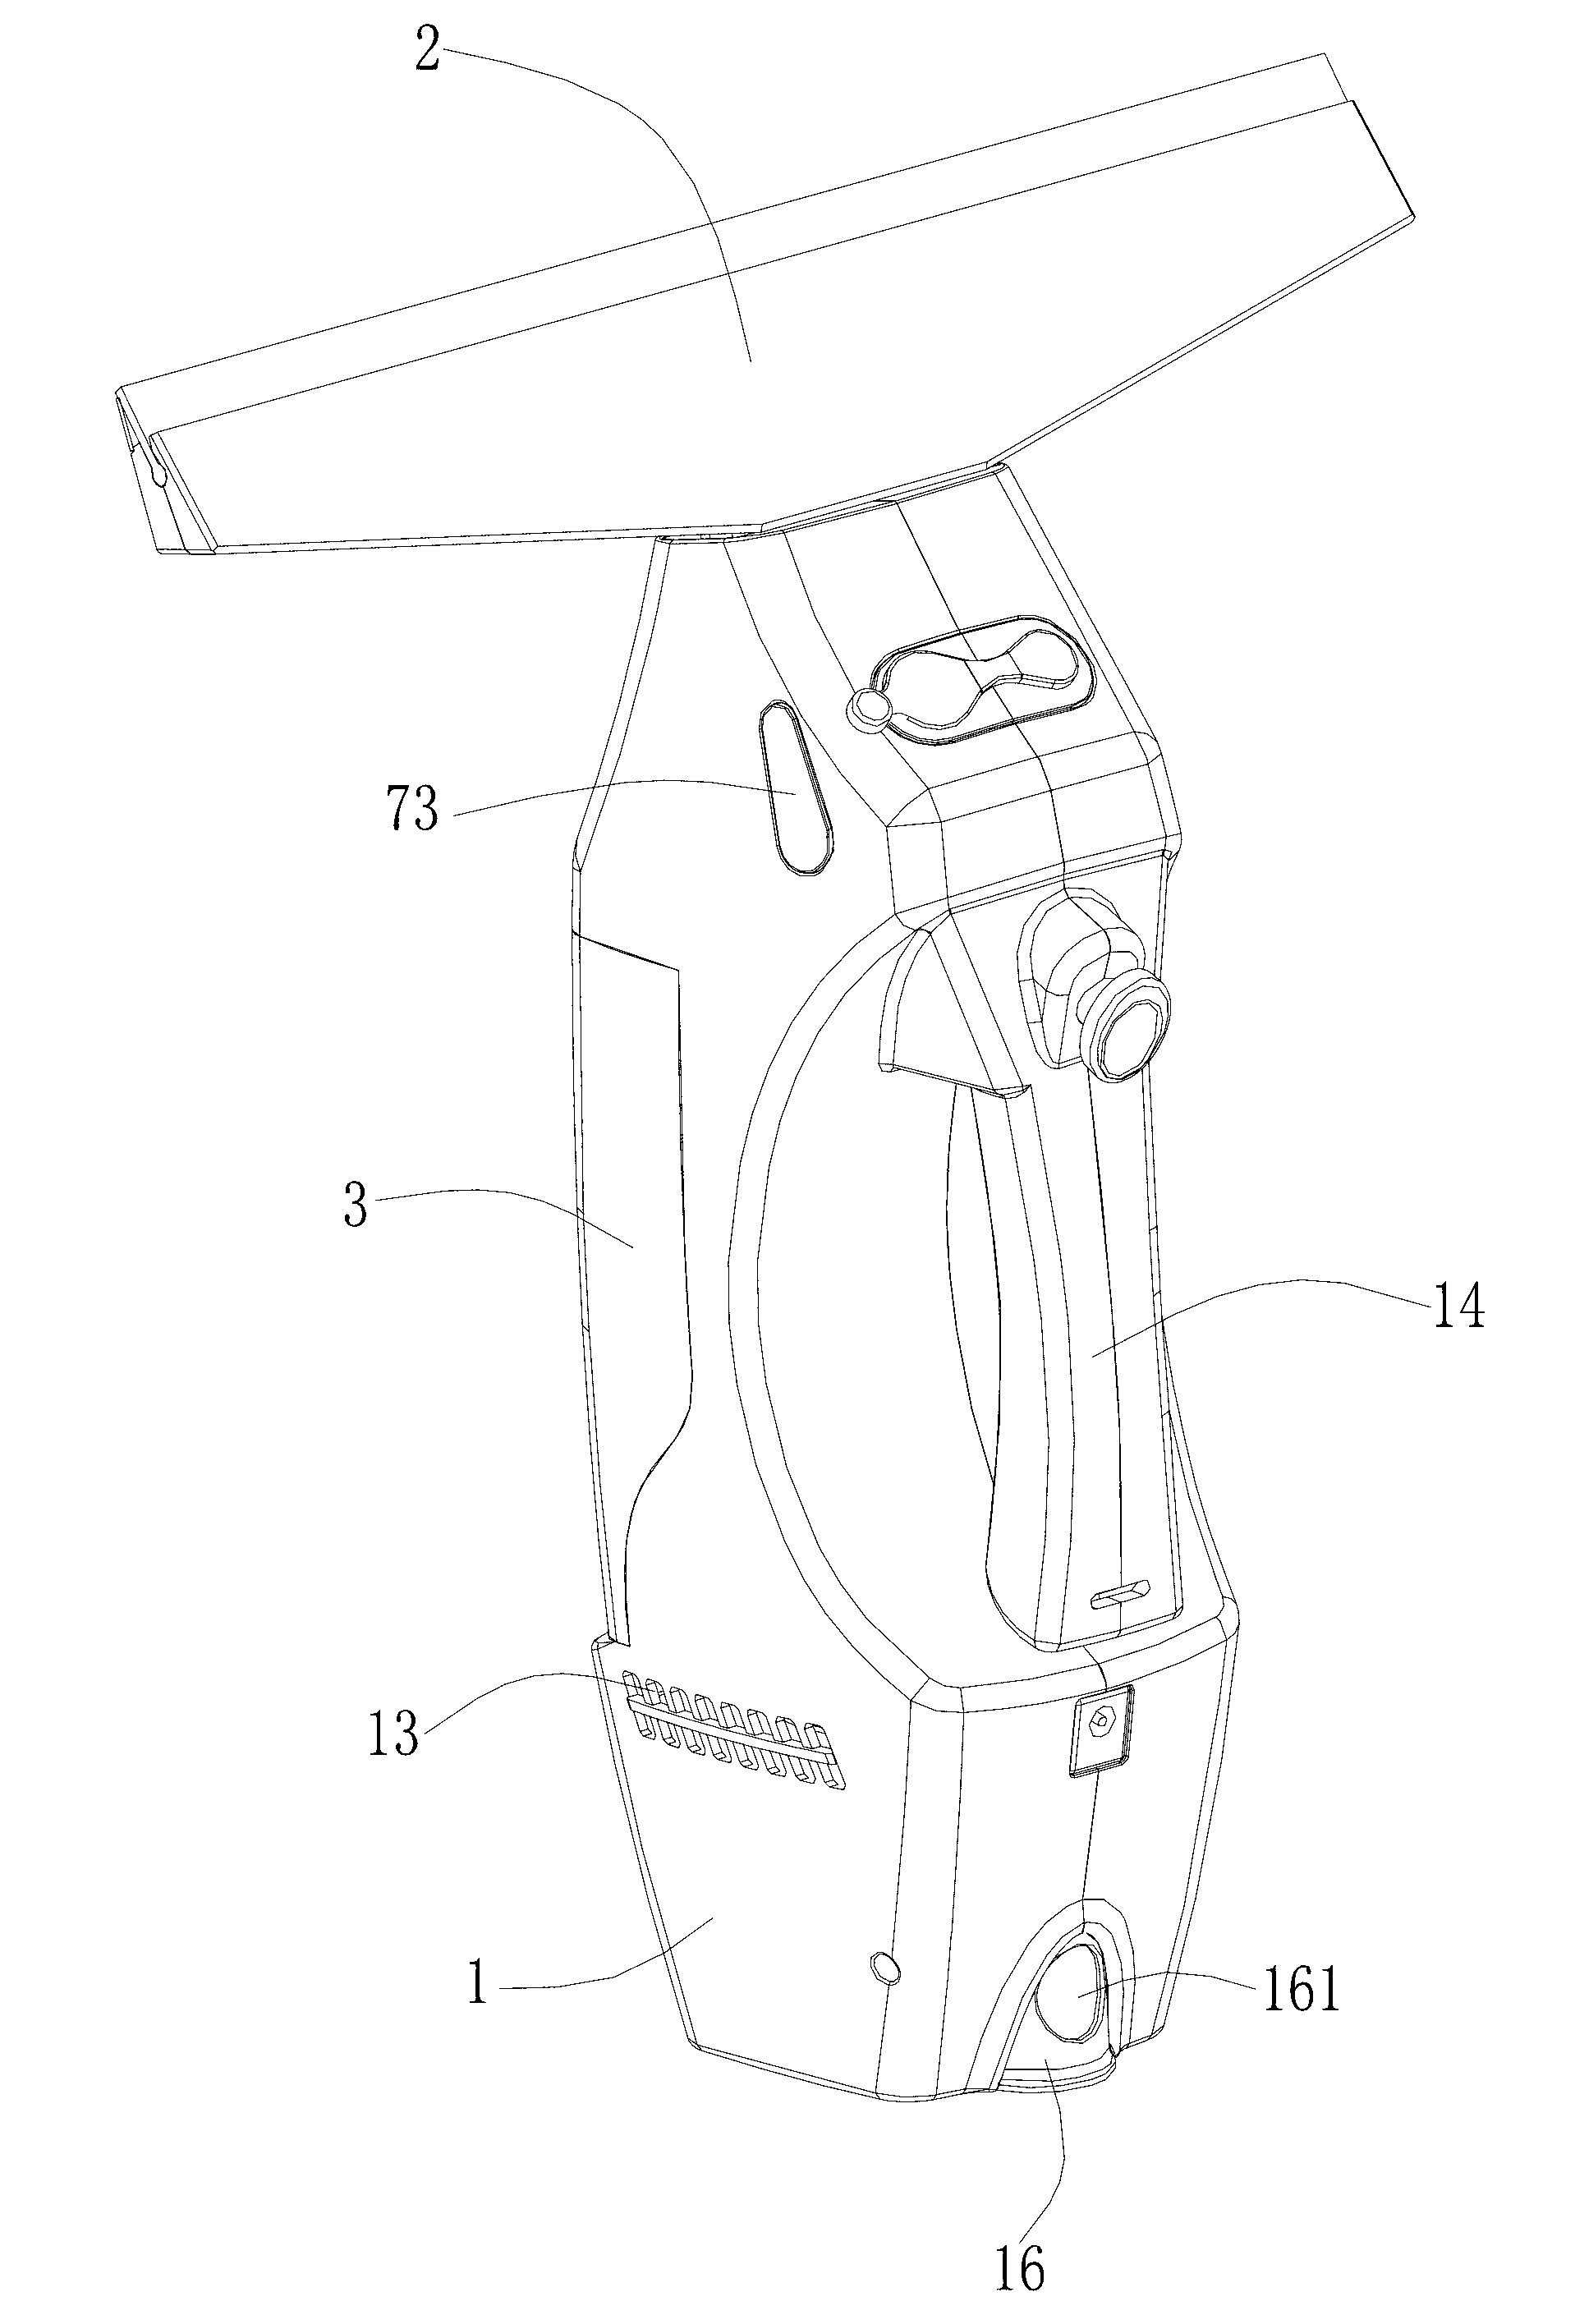 Surface cleaning device capable of spraying mist or spraying water